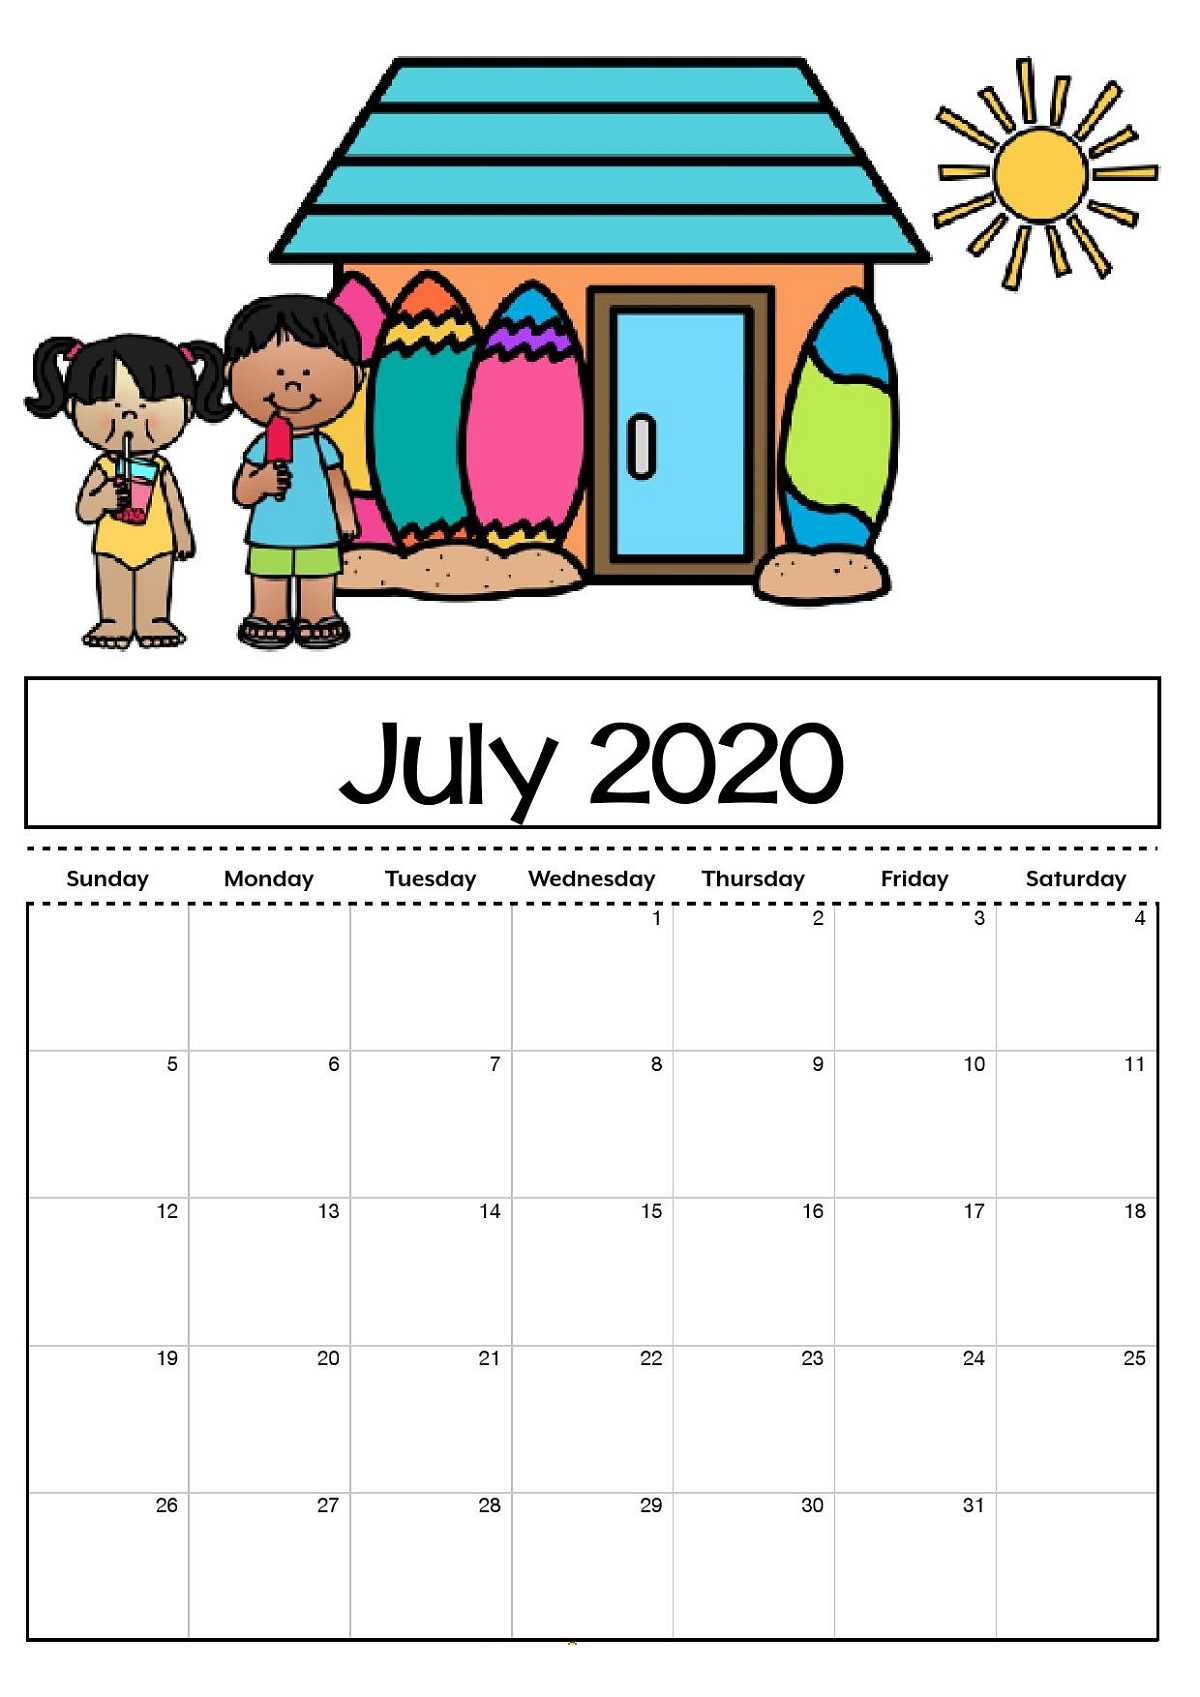 Free Printable Calendar Templates 2020 For Kids In Home With Blank Calendar Template For Kids